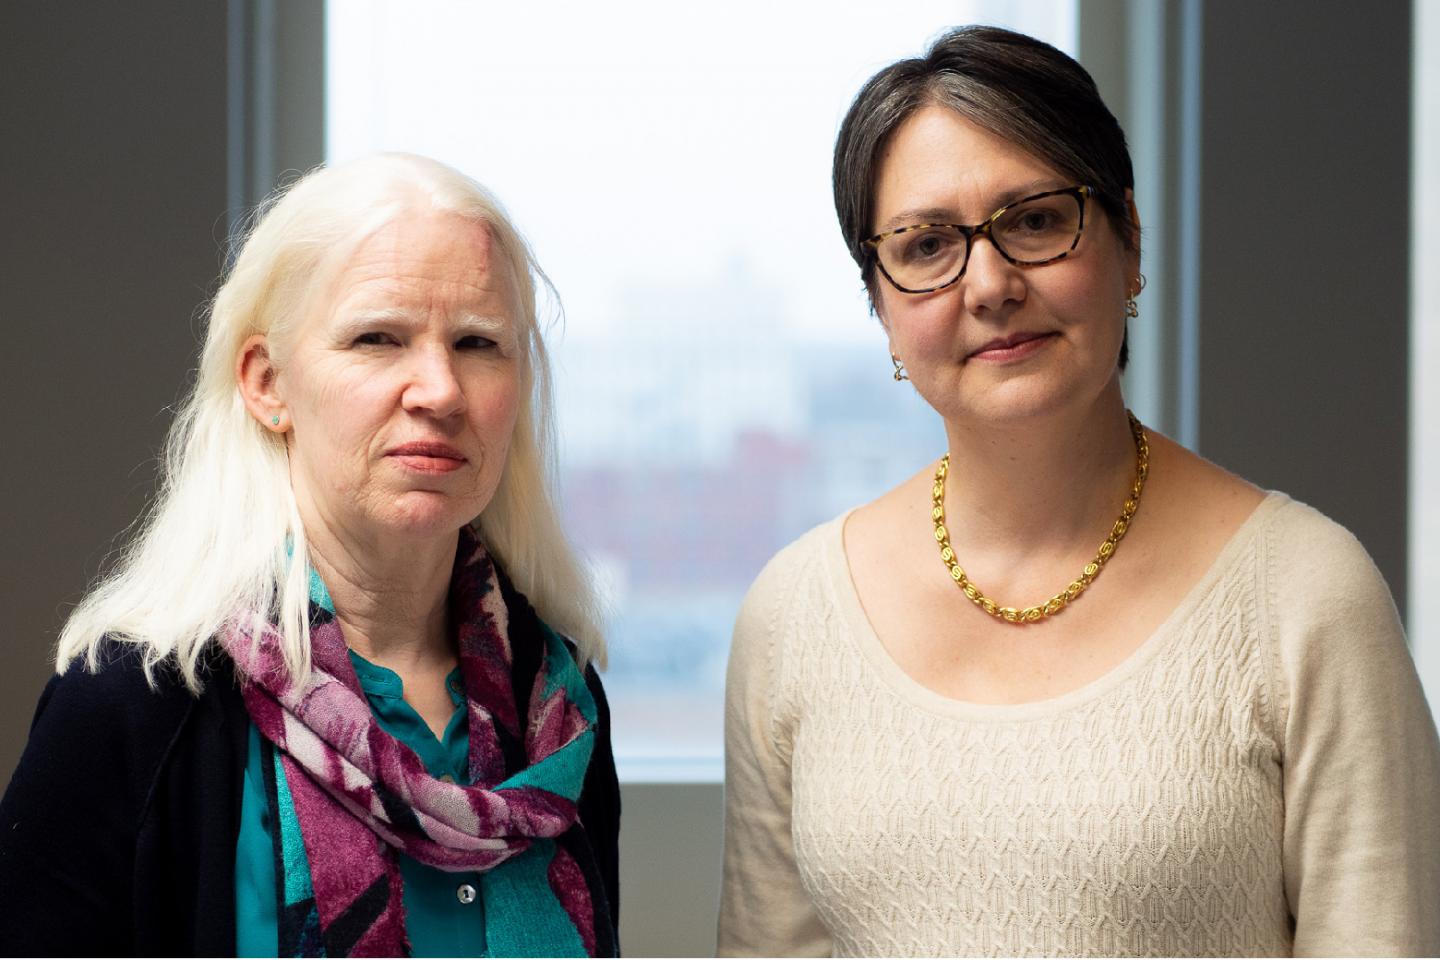 Lucia Wocial, Ph.D., R.N. (left) and Alexia Torke, M.D., M.S. (right)